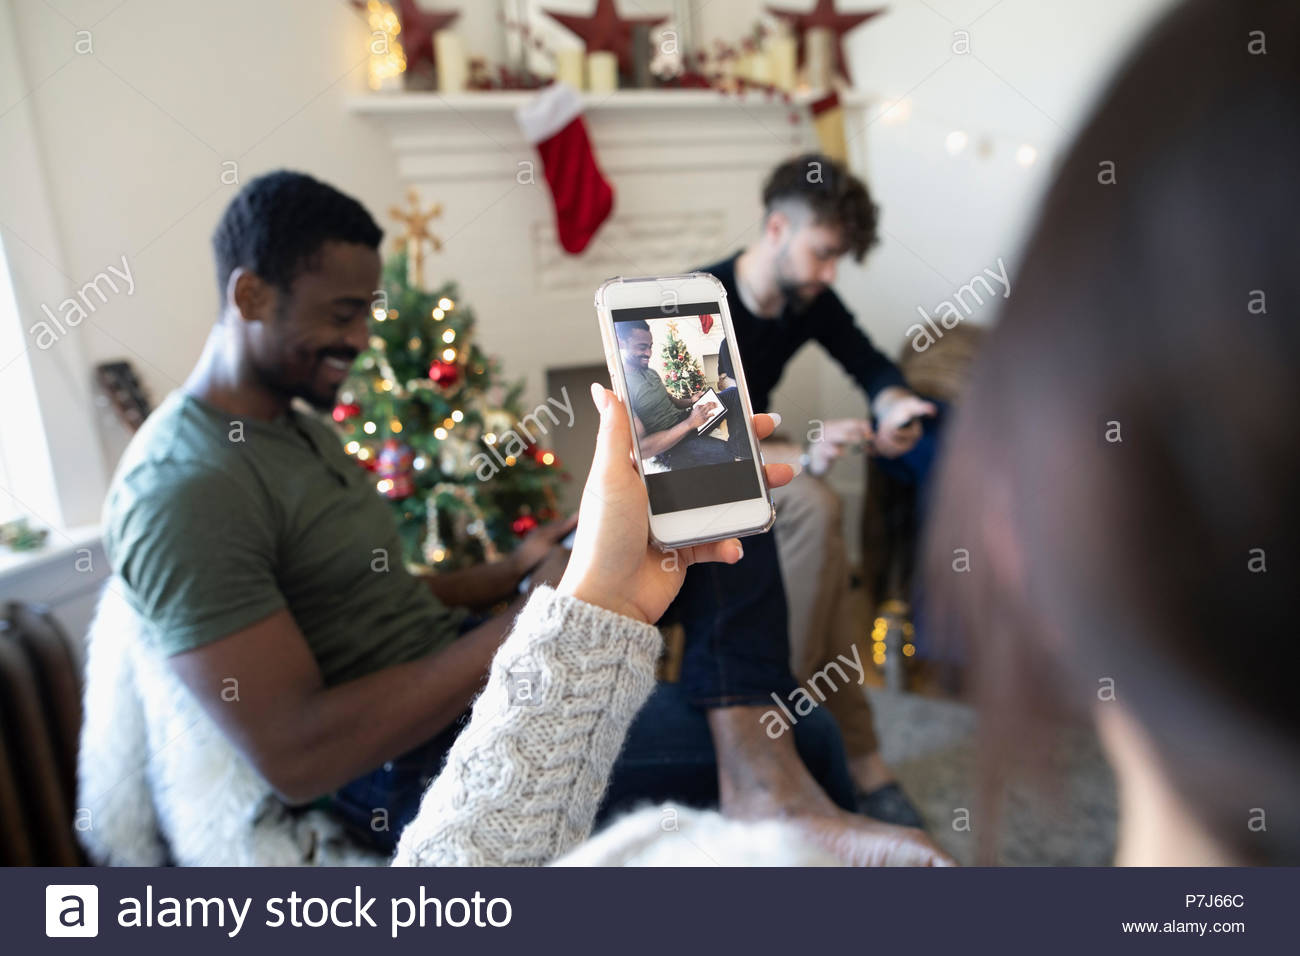 Young woman with camera phone photographing friends in Christmas living rooms Stock Photo